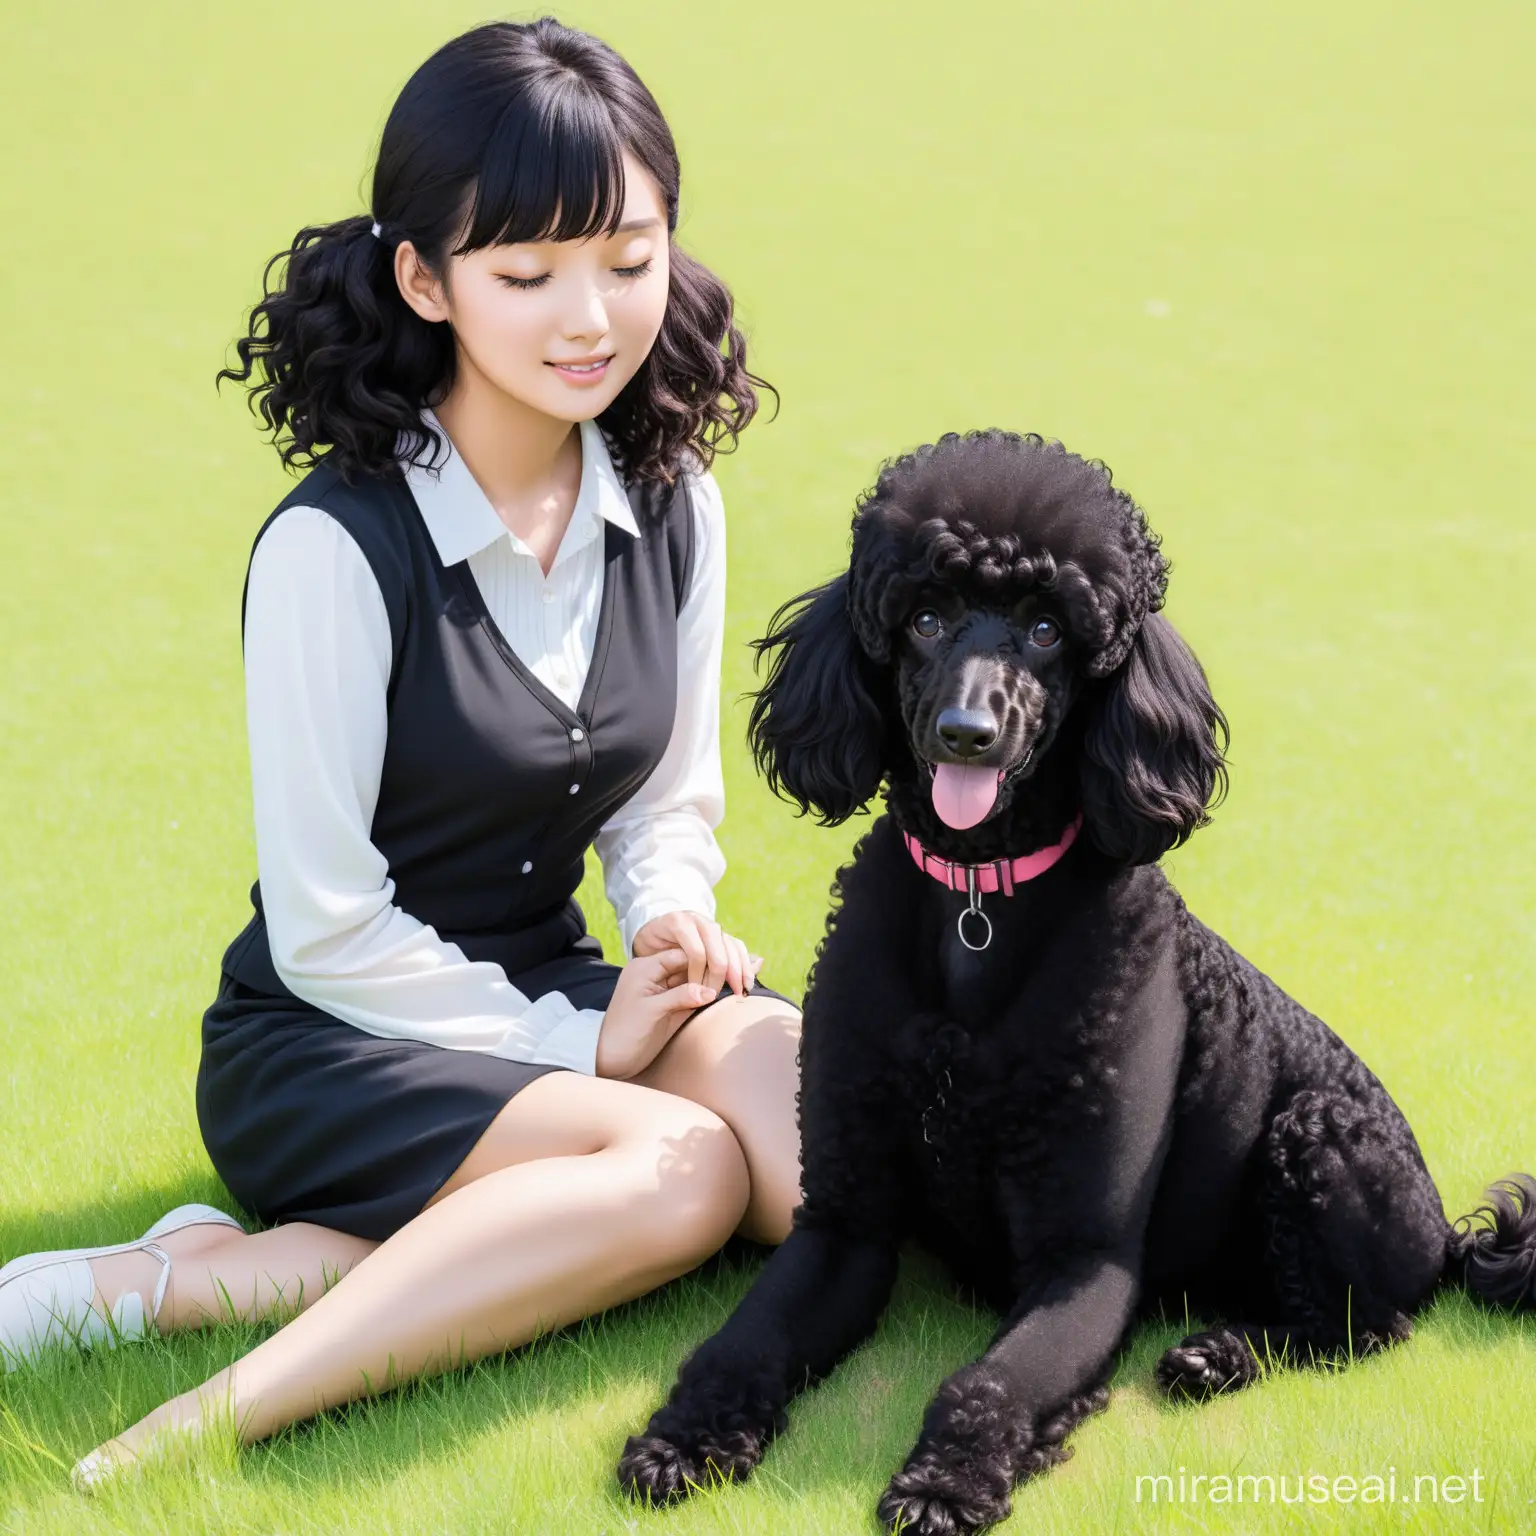 Young Woman Relaxing with Her Black Poodle in Lush Green Grass